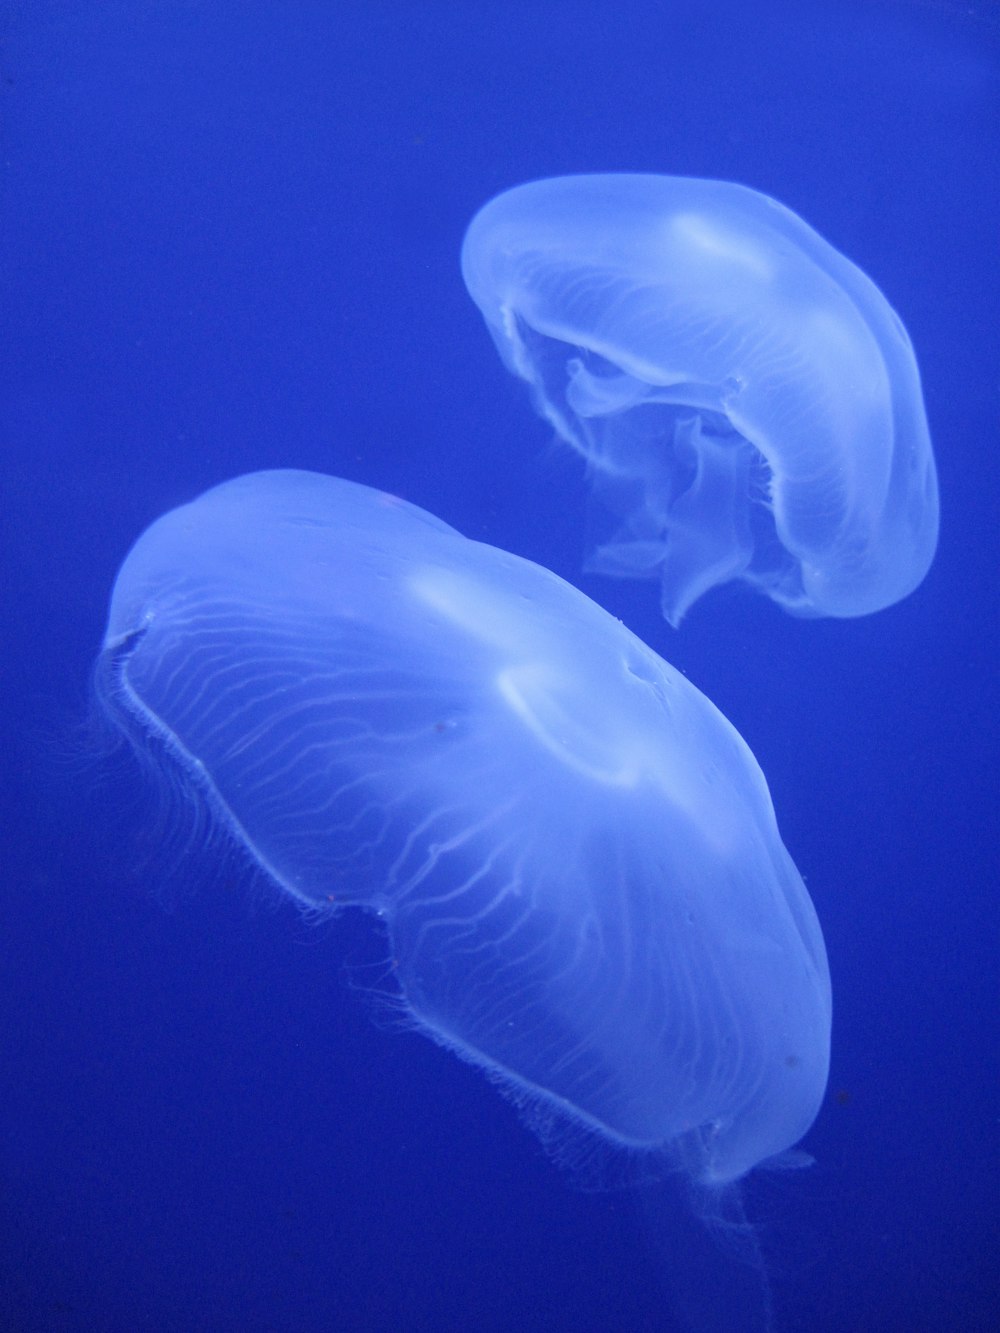 two jellyfish swimming in the blue water